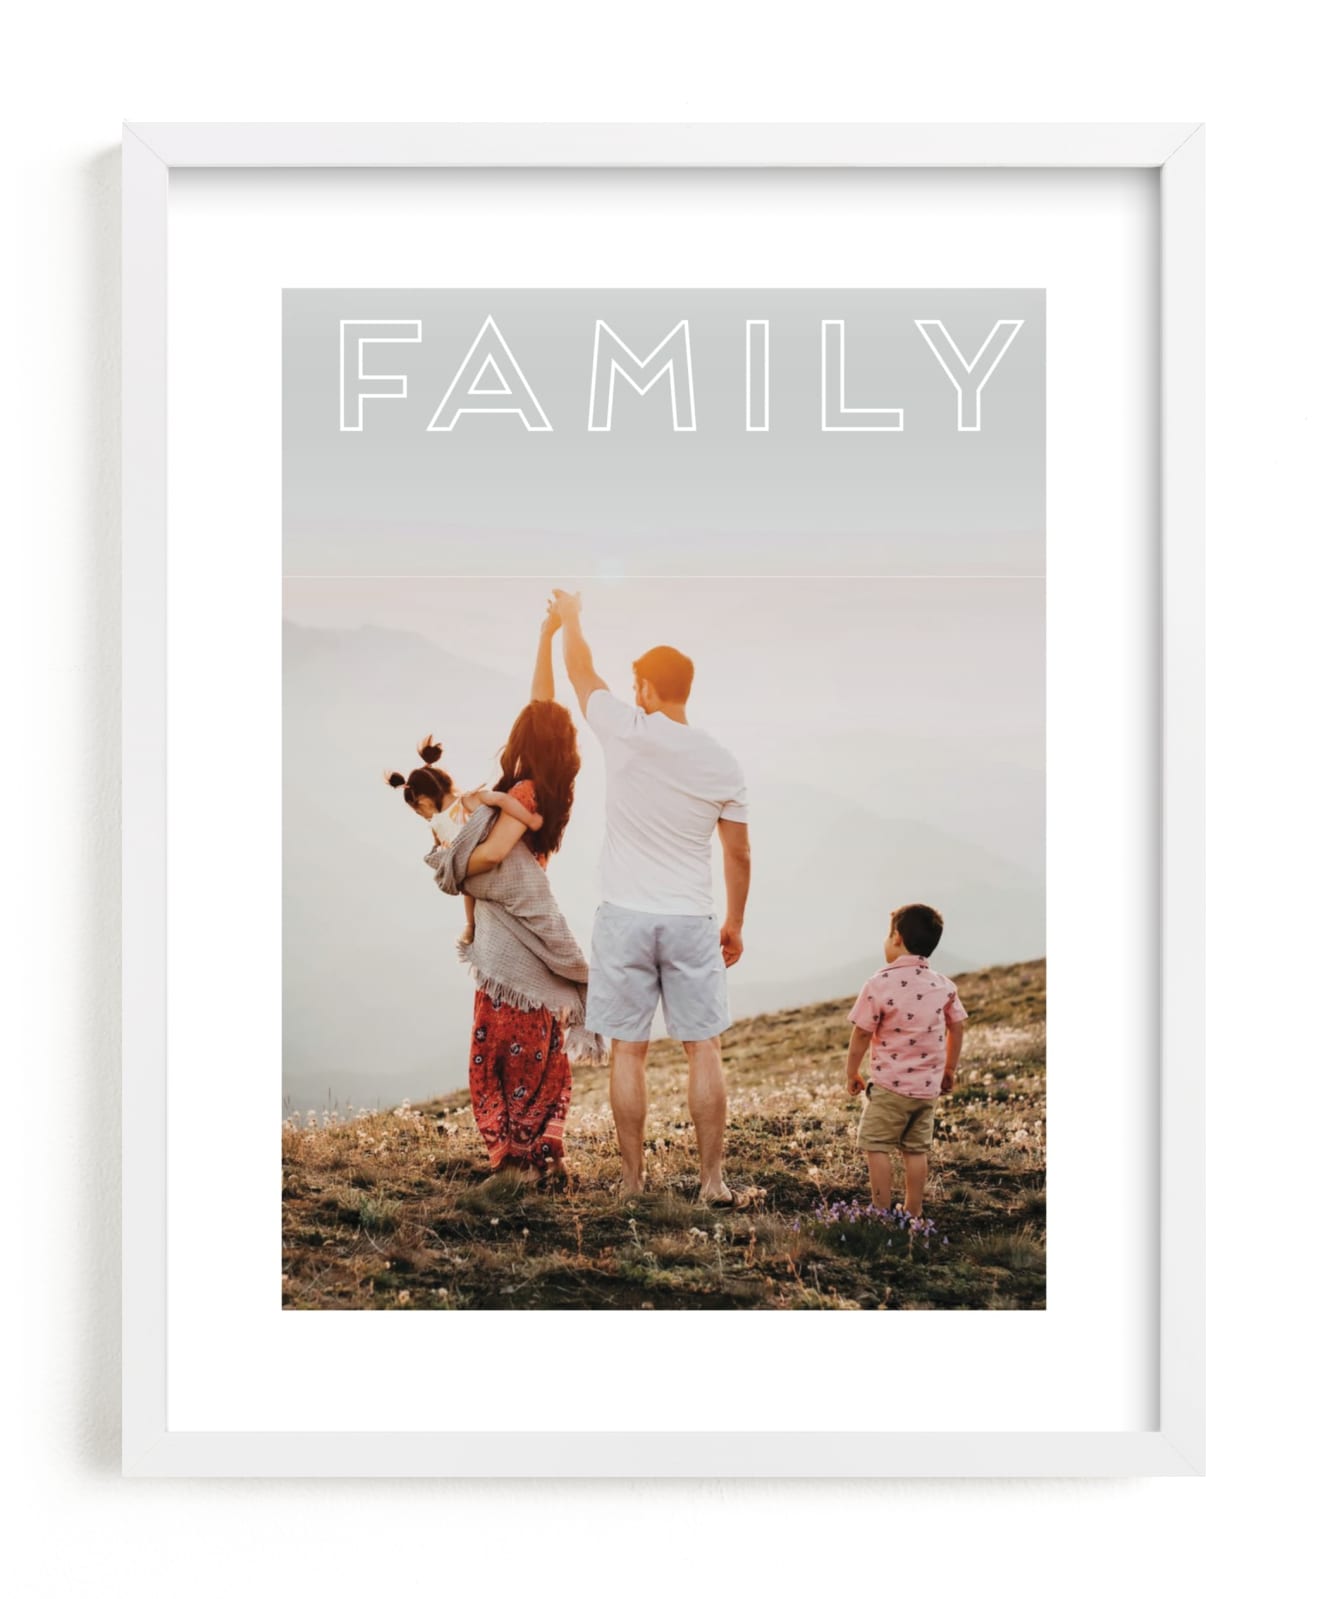 This is a white photo art by Johanna Phillips Huuva called Family above all.